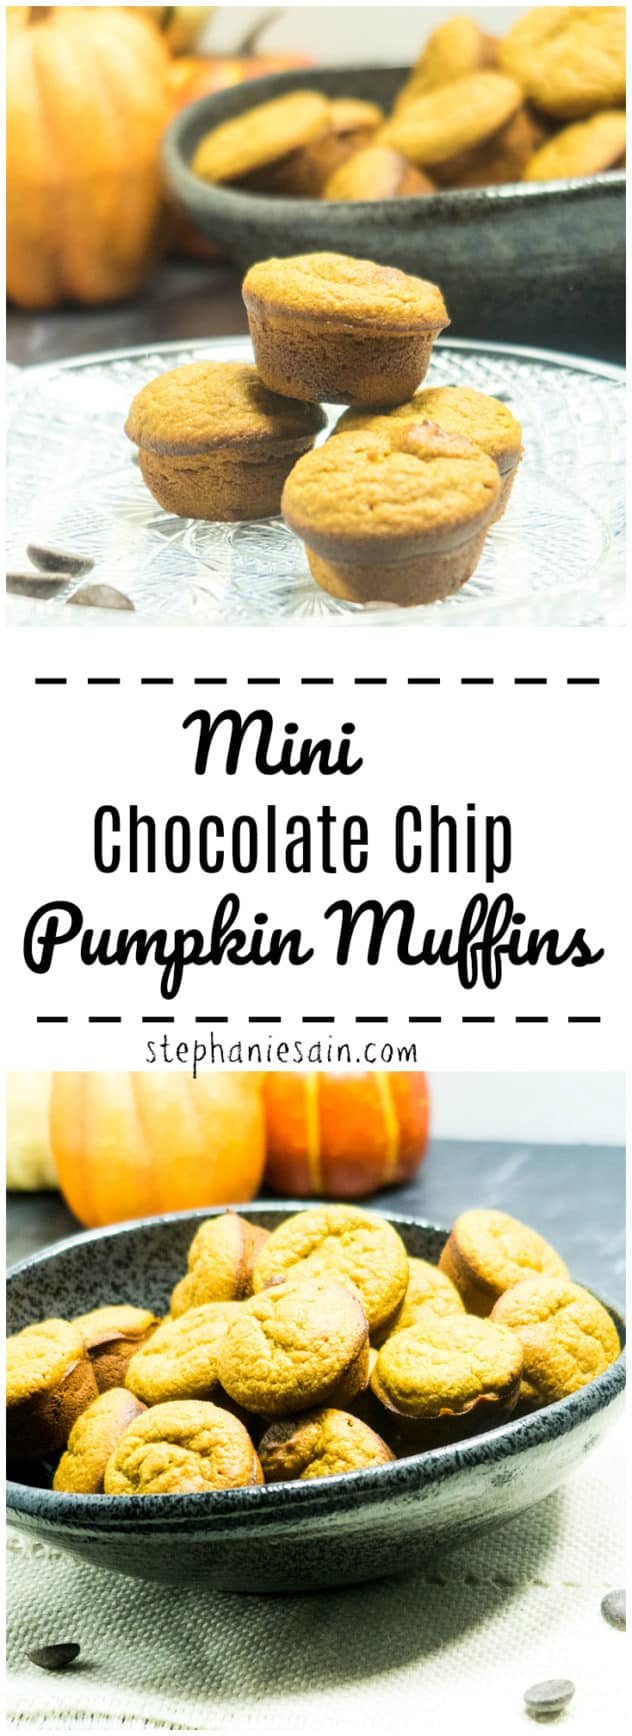 Mini Chocolate Chip Pumpkin Muffins are perfect for breakfast or snack. The perfect blend of pumpkin spice & chocolate. Made without added refined sugars, Gluten free & Vegetarian.